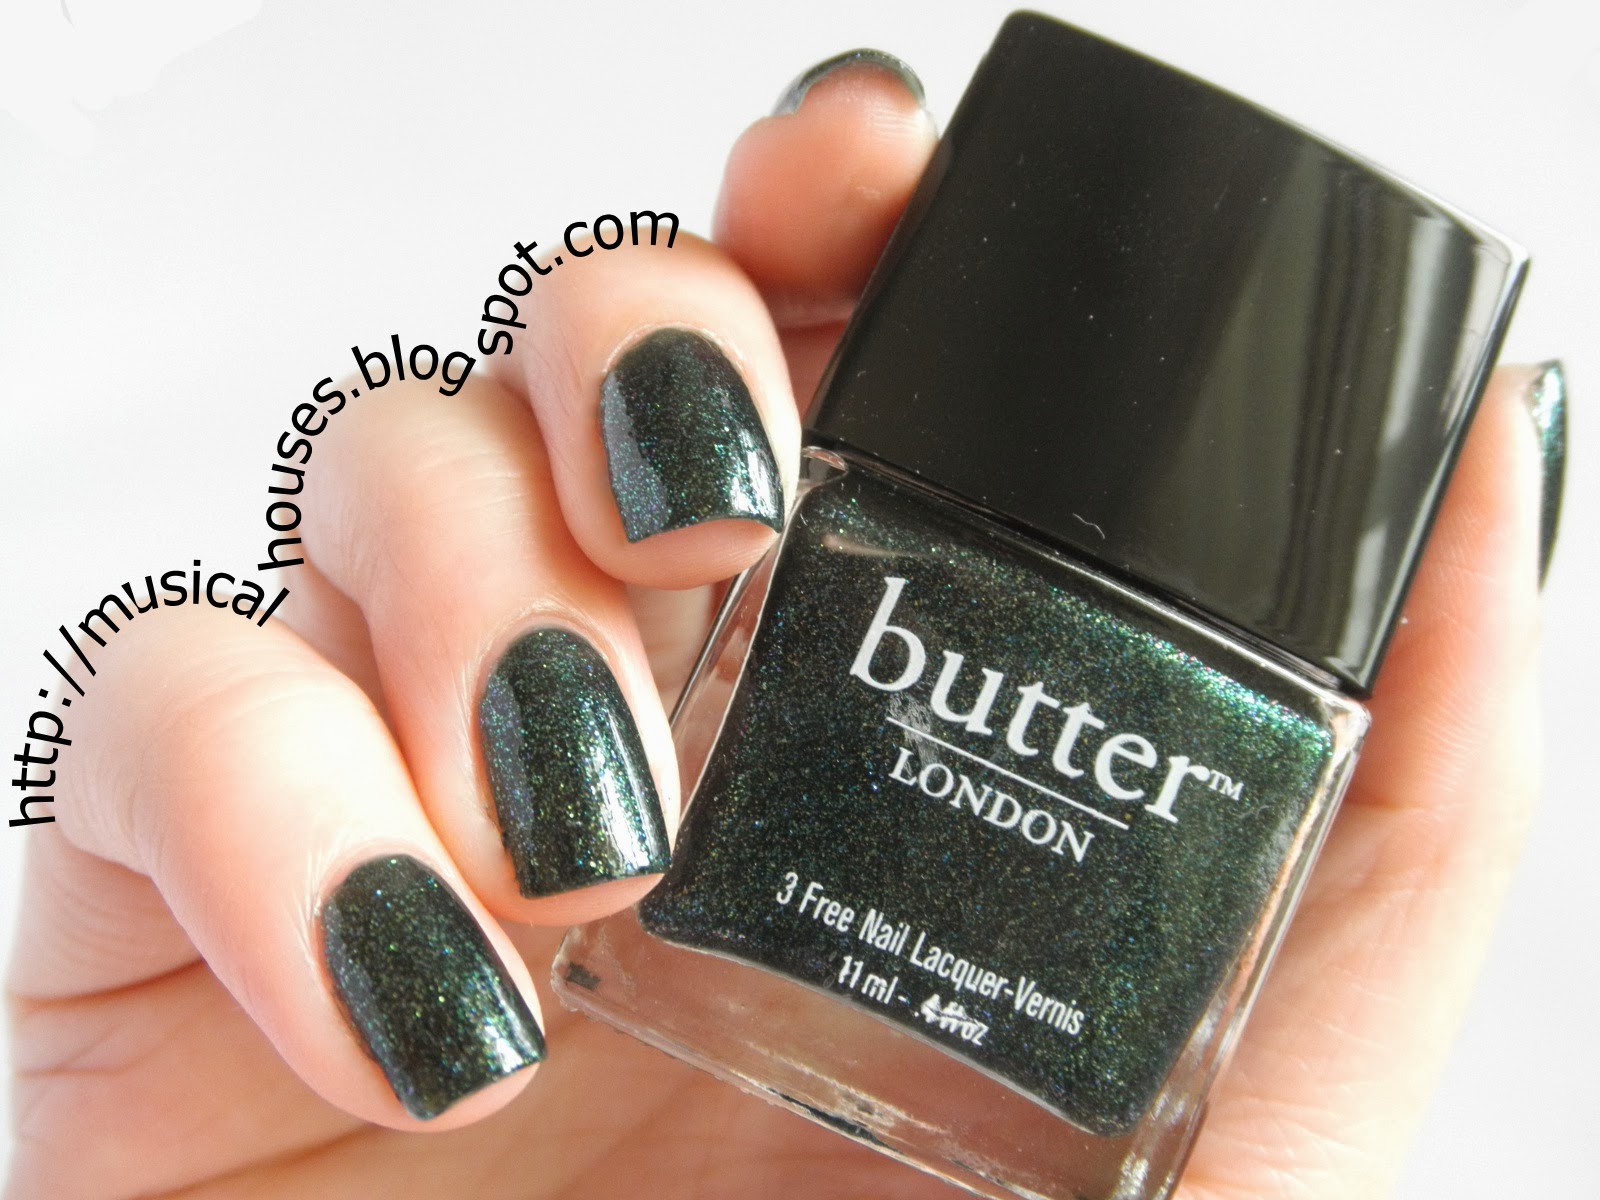 7. Butter London Patent Shine 10X Nail Lacquer in "Fruit Machine" - wide 2